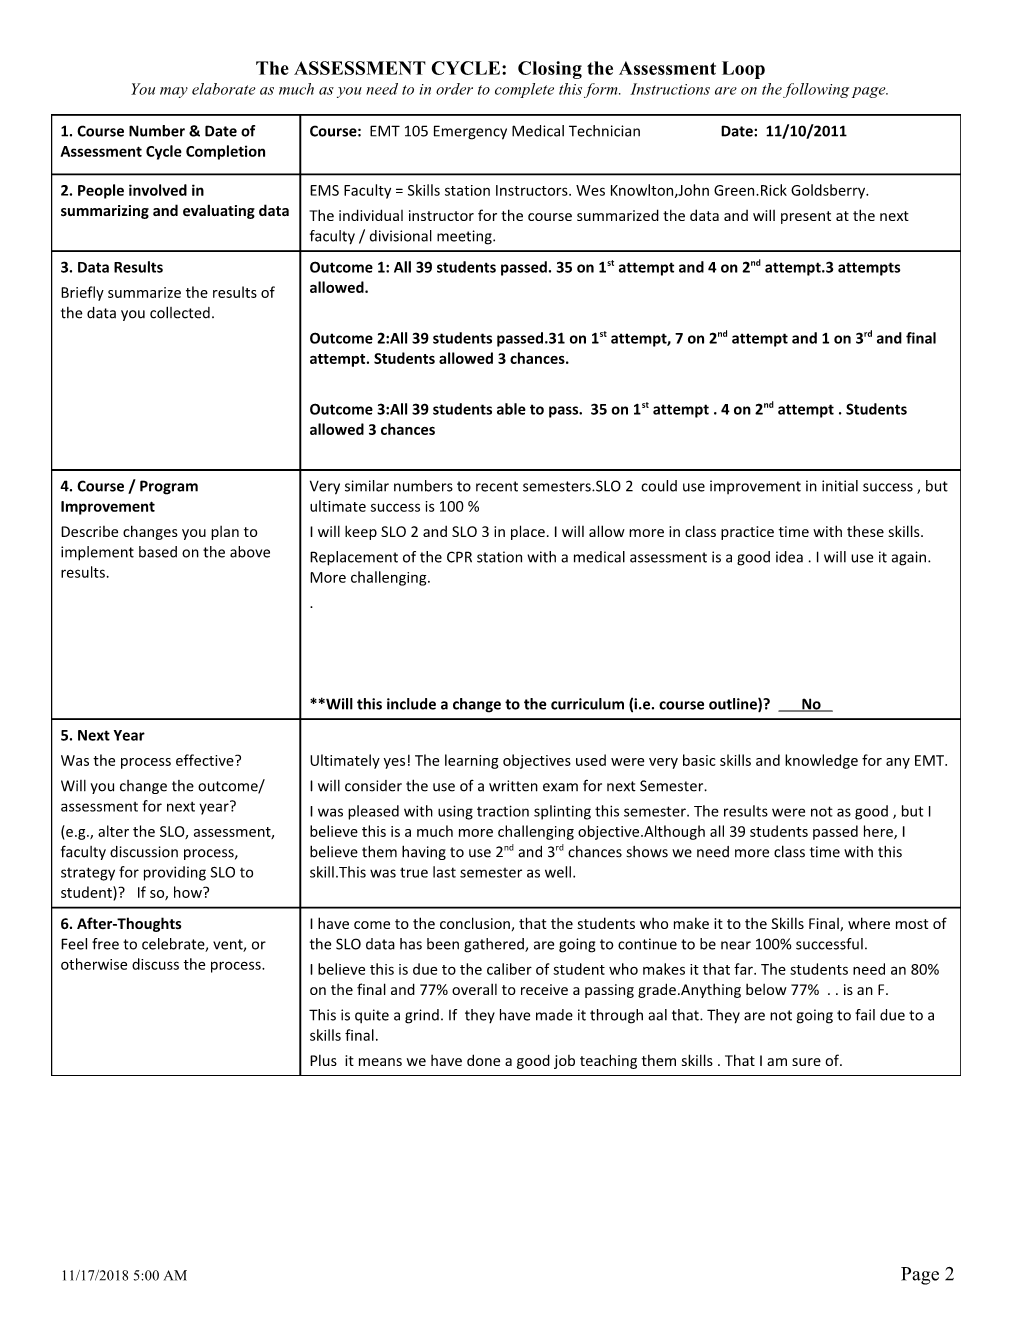 Student Learning Outcomes (SLO) Assessment Cycle Form